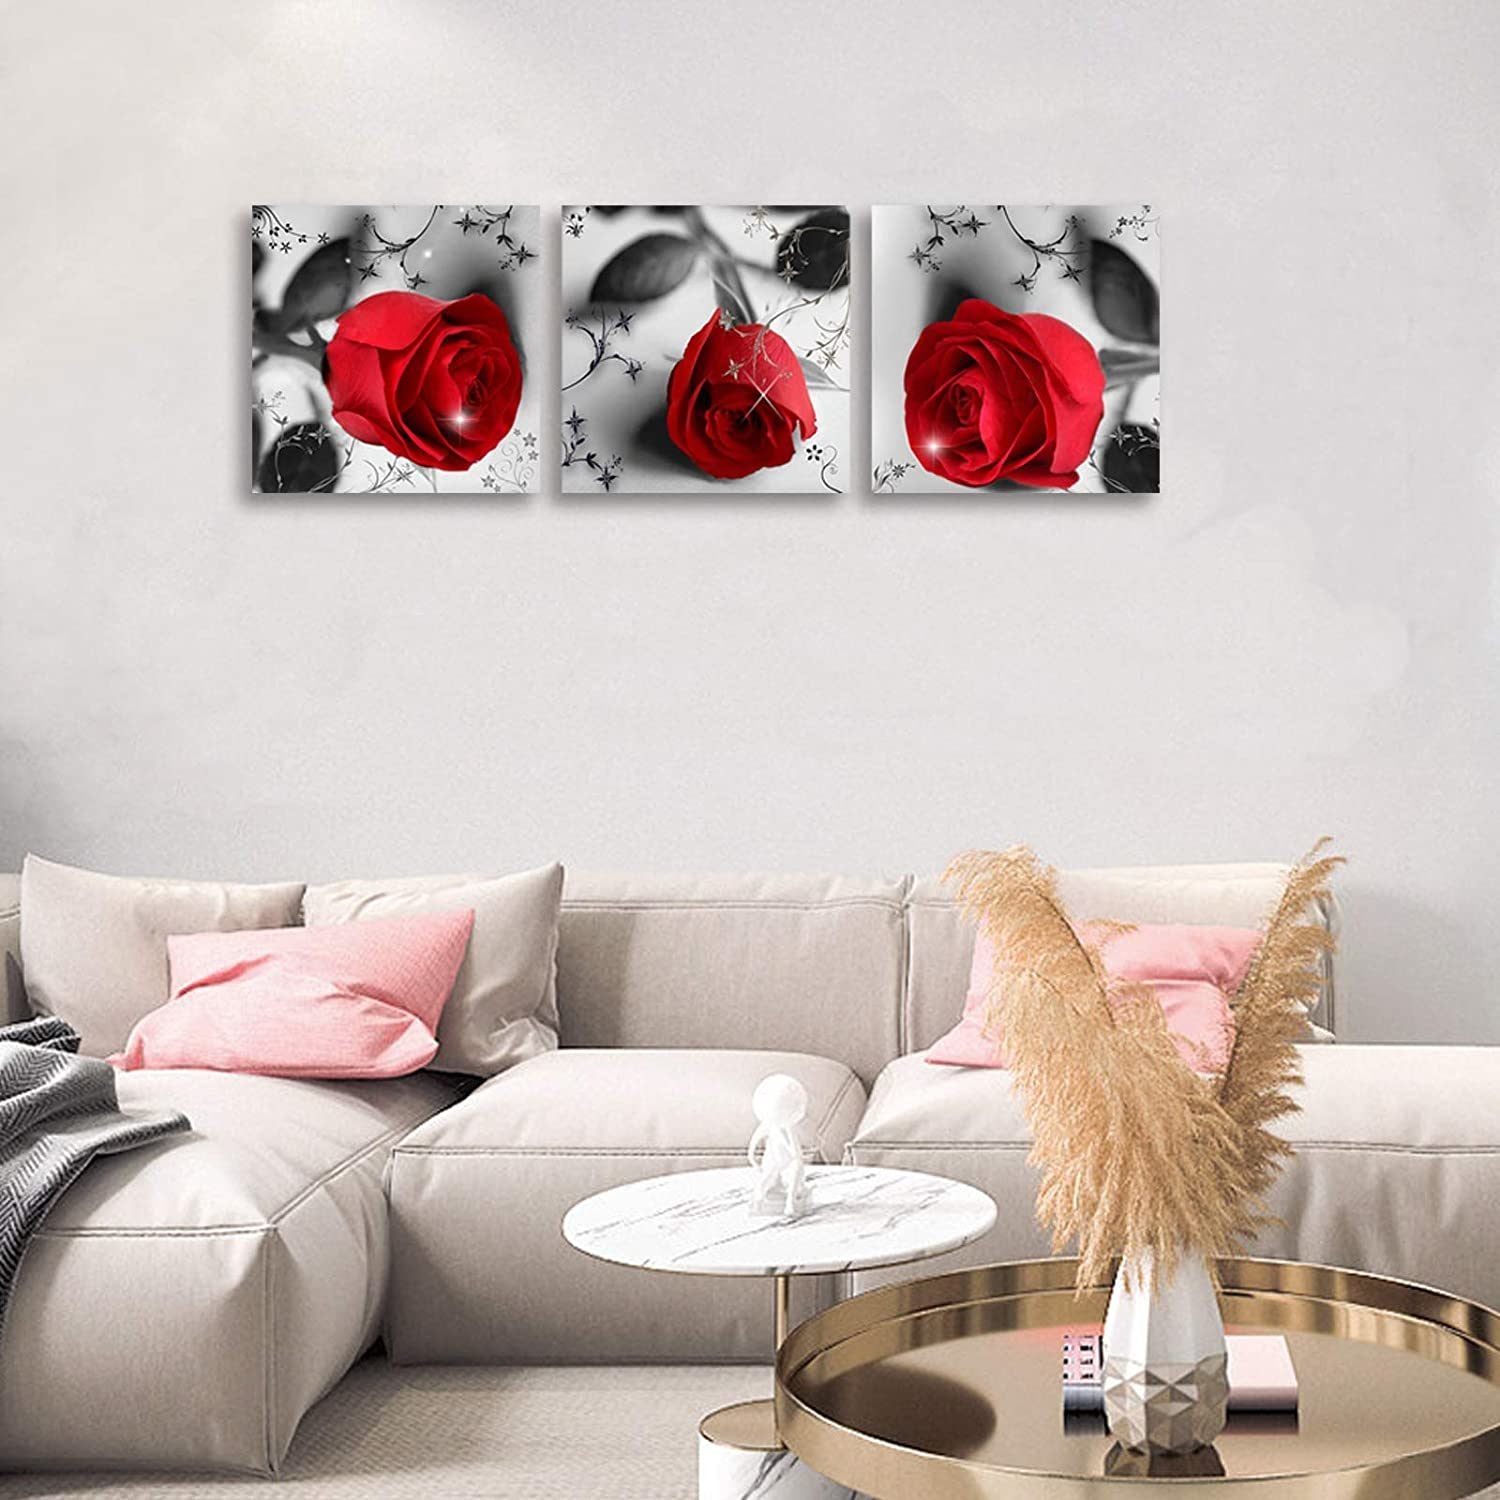 Black and Red Wall Art Red Rose Canvas Prints for Living Room Flower Paintings for Home Bedroom Bathrooms Decor